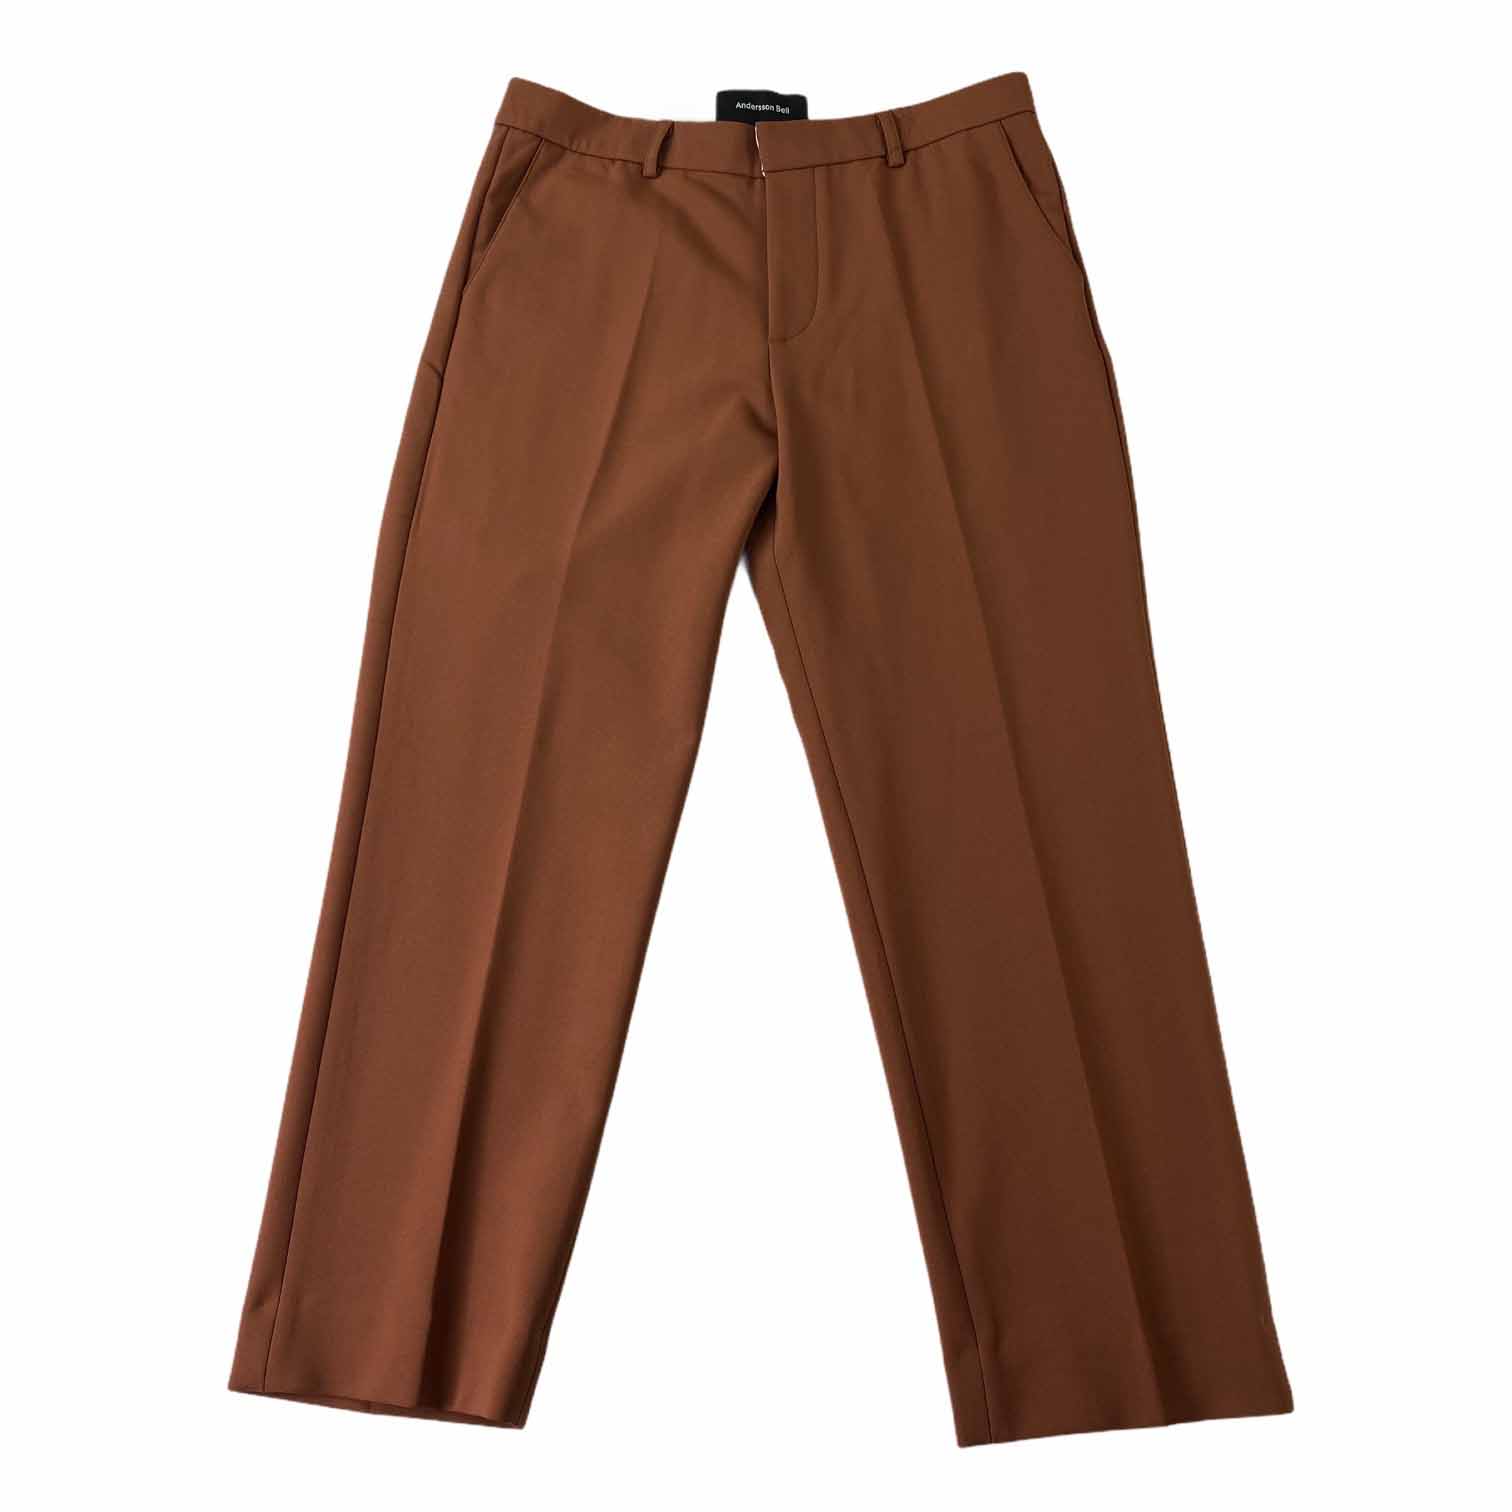 [Anderson Bell] Brown Span Pants - Size L